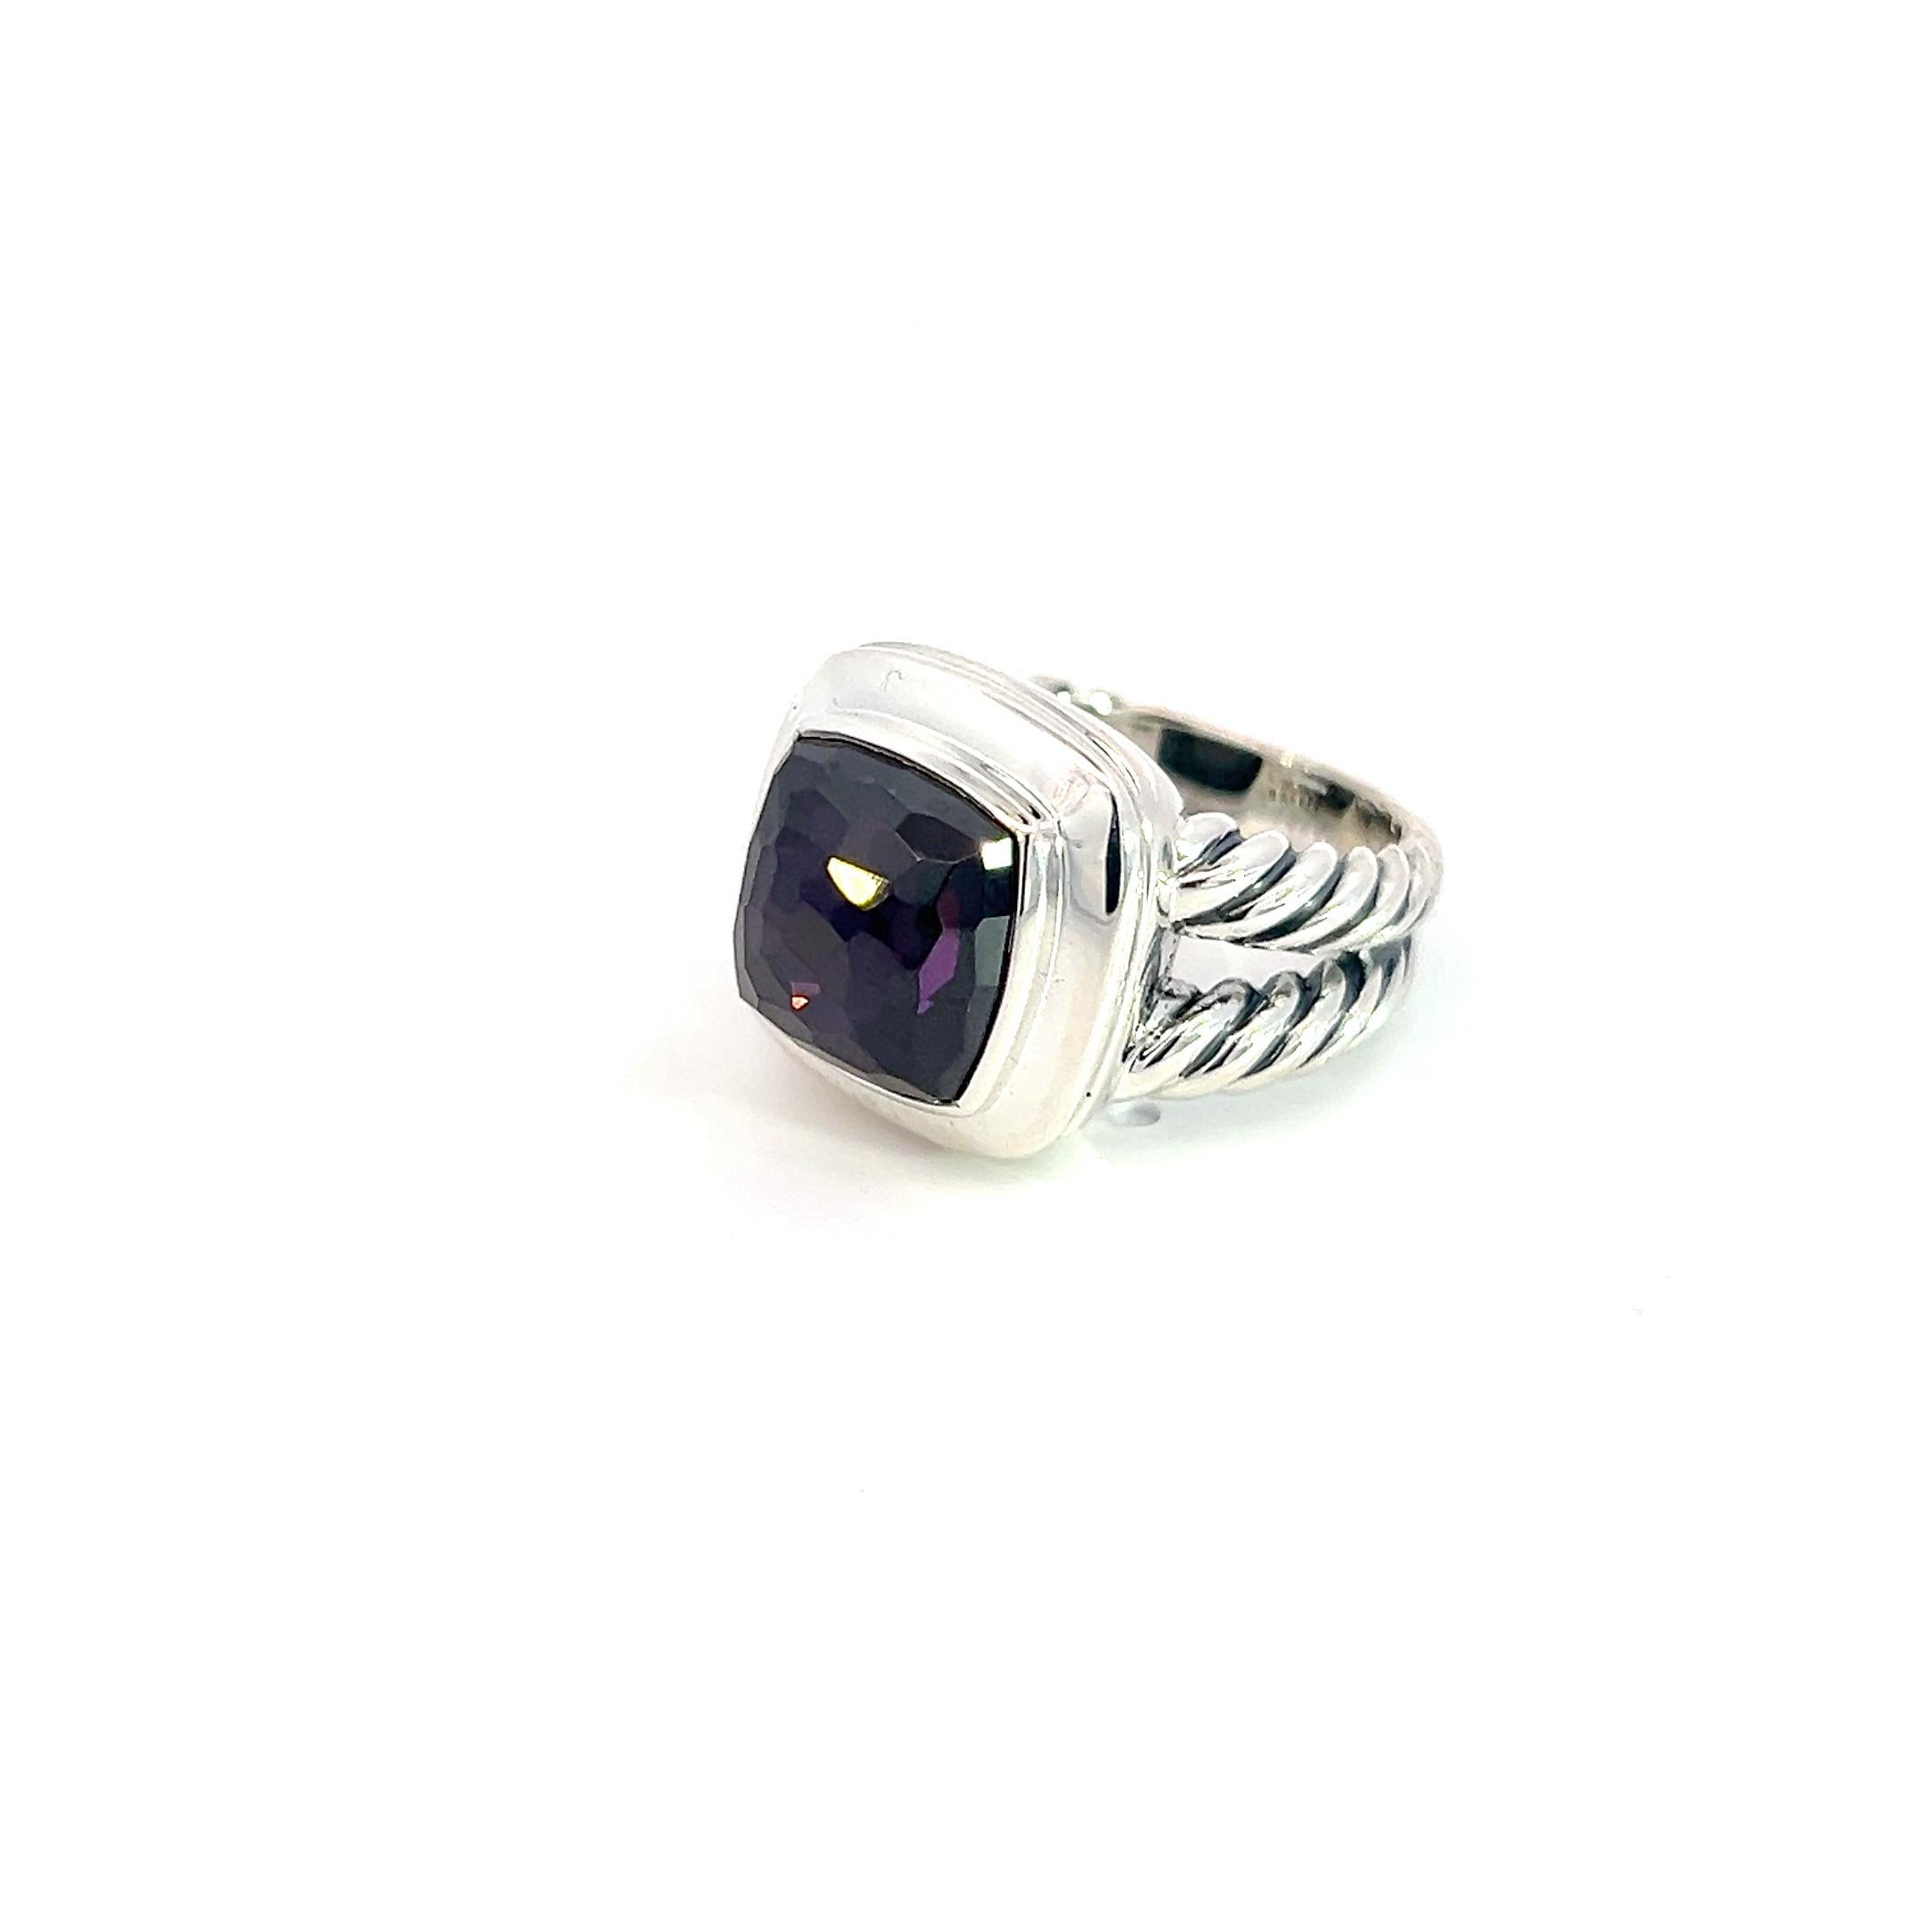 Authentic David Yurman Estate Black Orquid Albion Ring Size 6 Silver 11 mm DY359

Retail: $590

Ring from ALBION COLLECTION

This elegant Authentic David Yurman ring is made of sterling silver.

TRUSTED SELLER SINCE 2002

PLEASE SEE OUR HUNDREDS OF